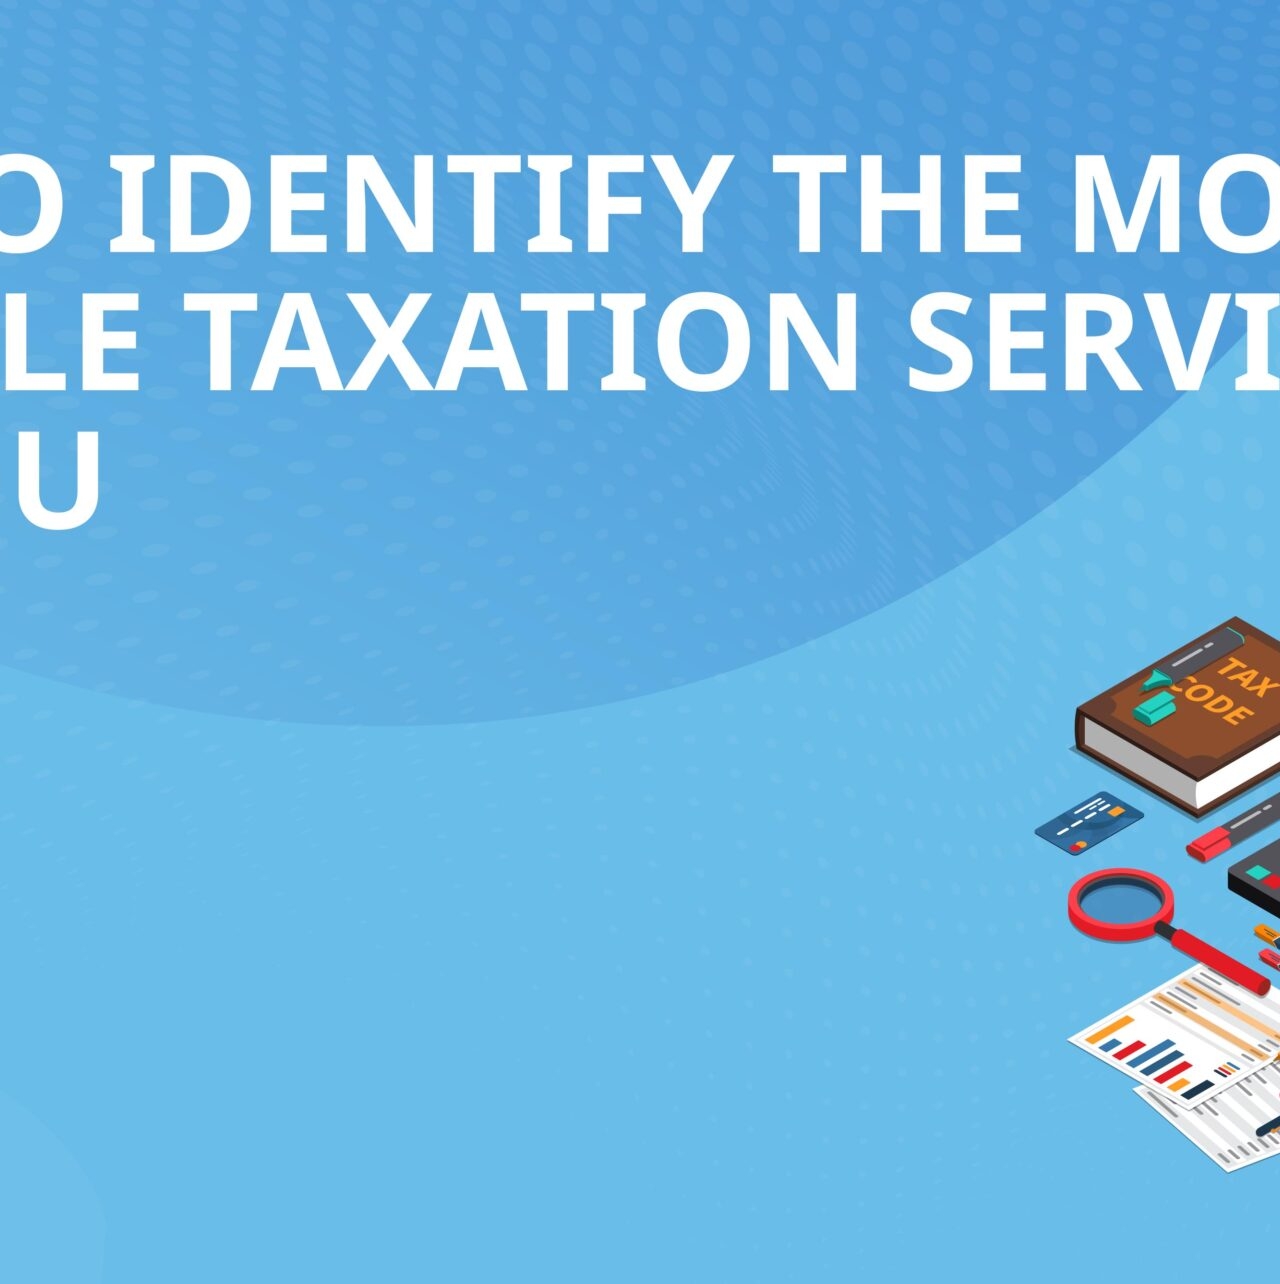 How to Identify the most suitable taxation service for you?